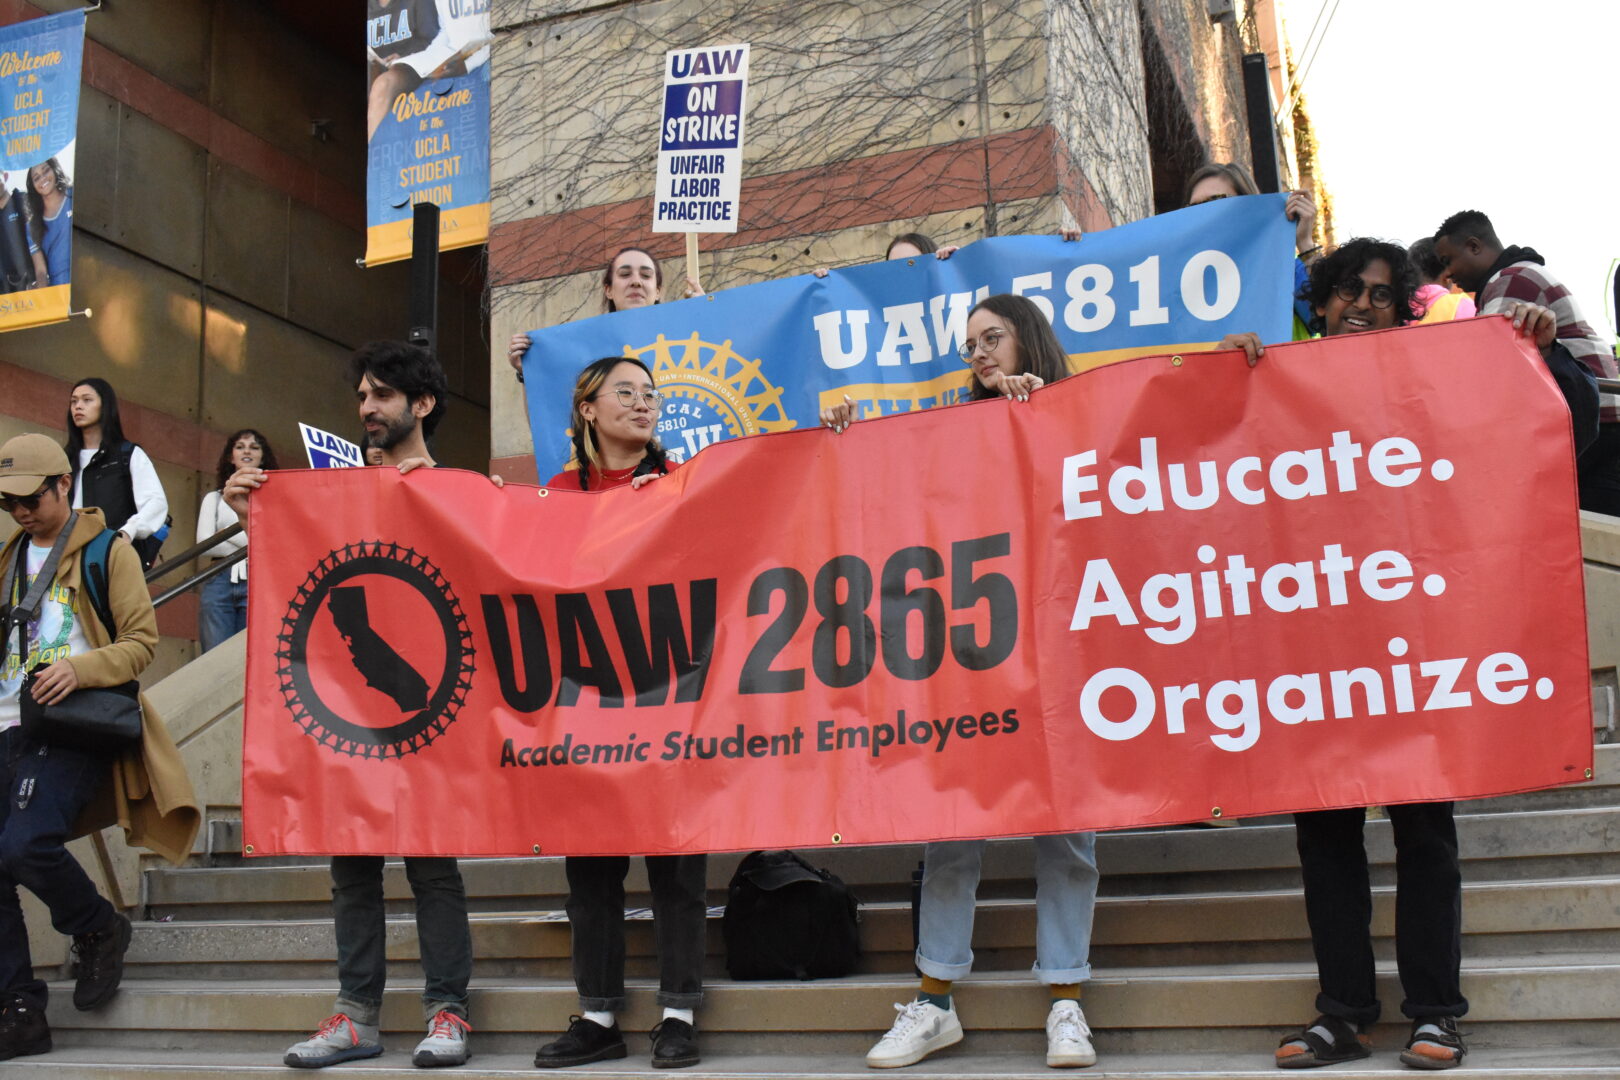 Strikers holding UAW 2865 banner